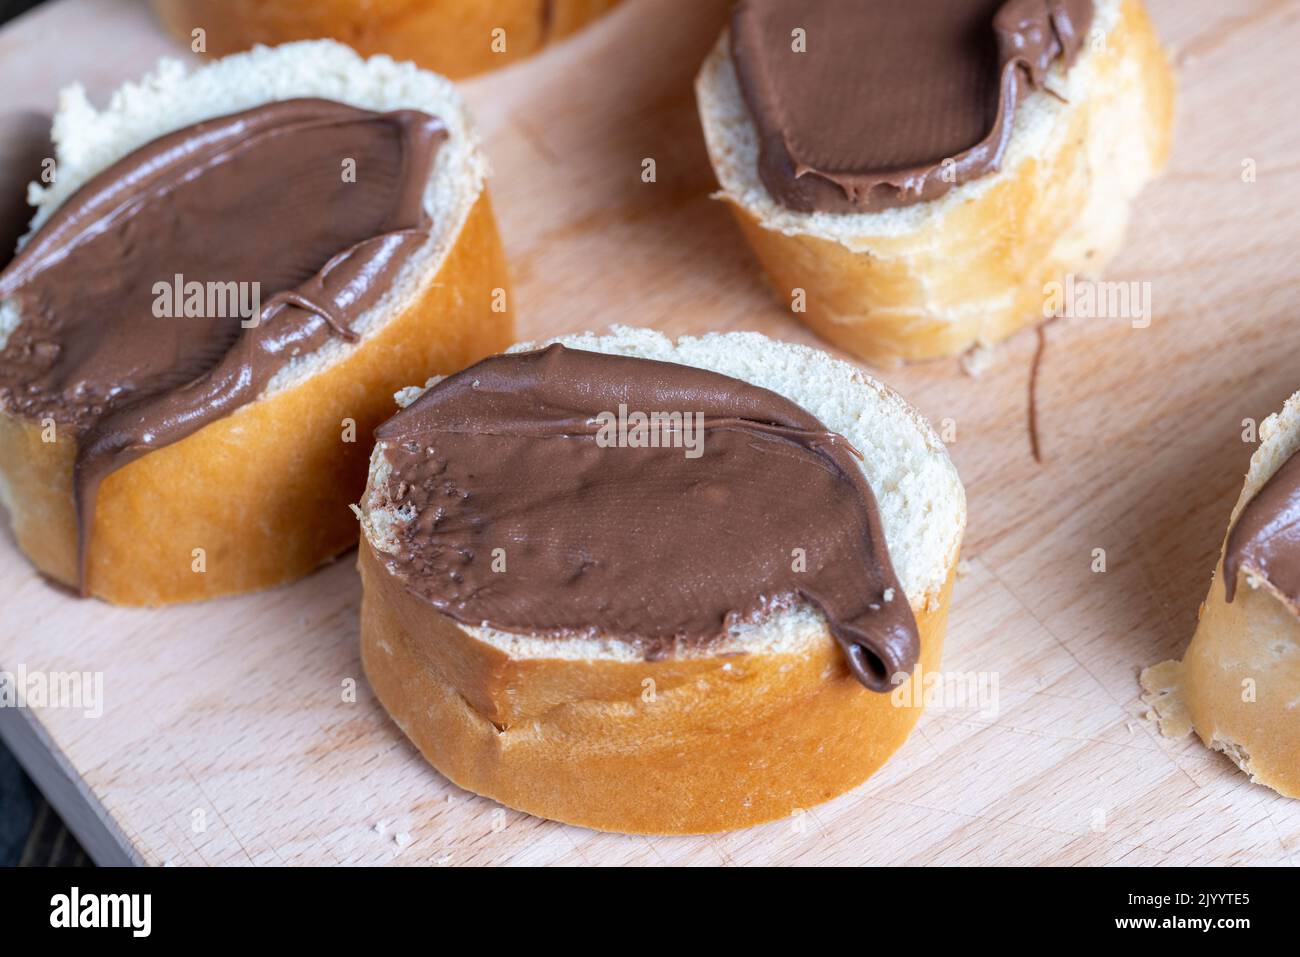 Chocolate butter spread on bread while cooking breakfast, making breakfast from wheat bread with bran and chocolate butter Stock Photo